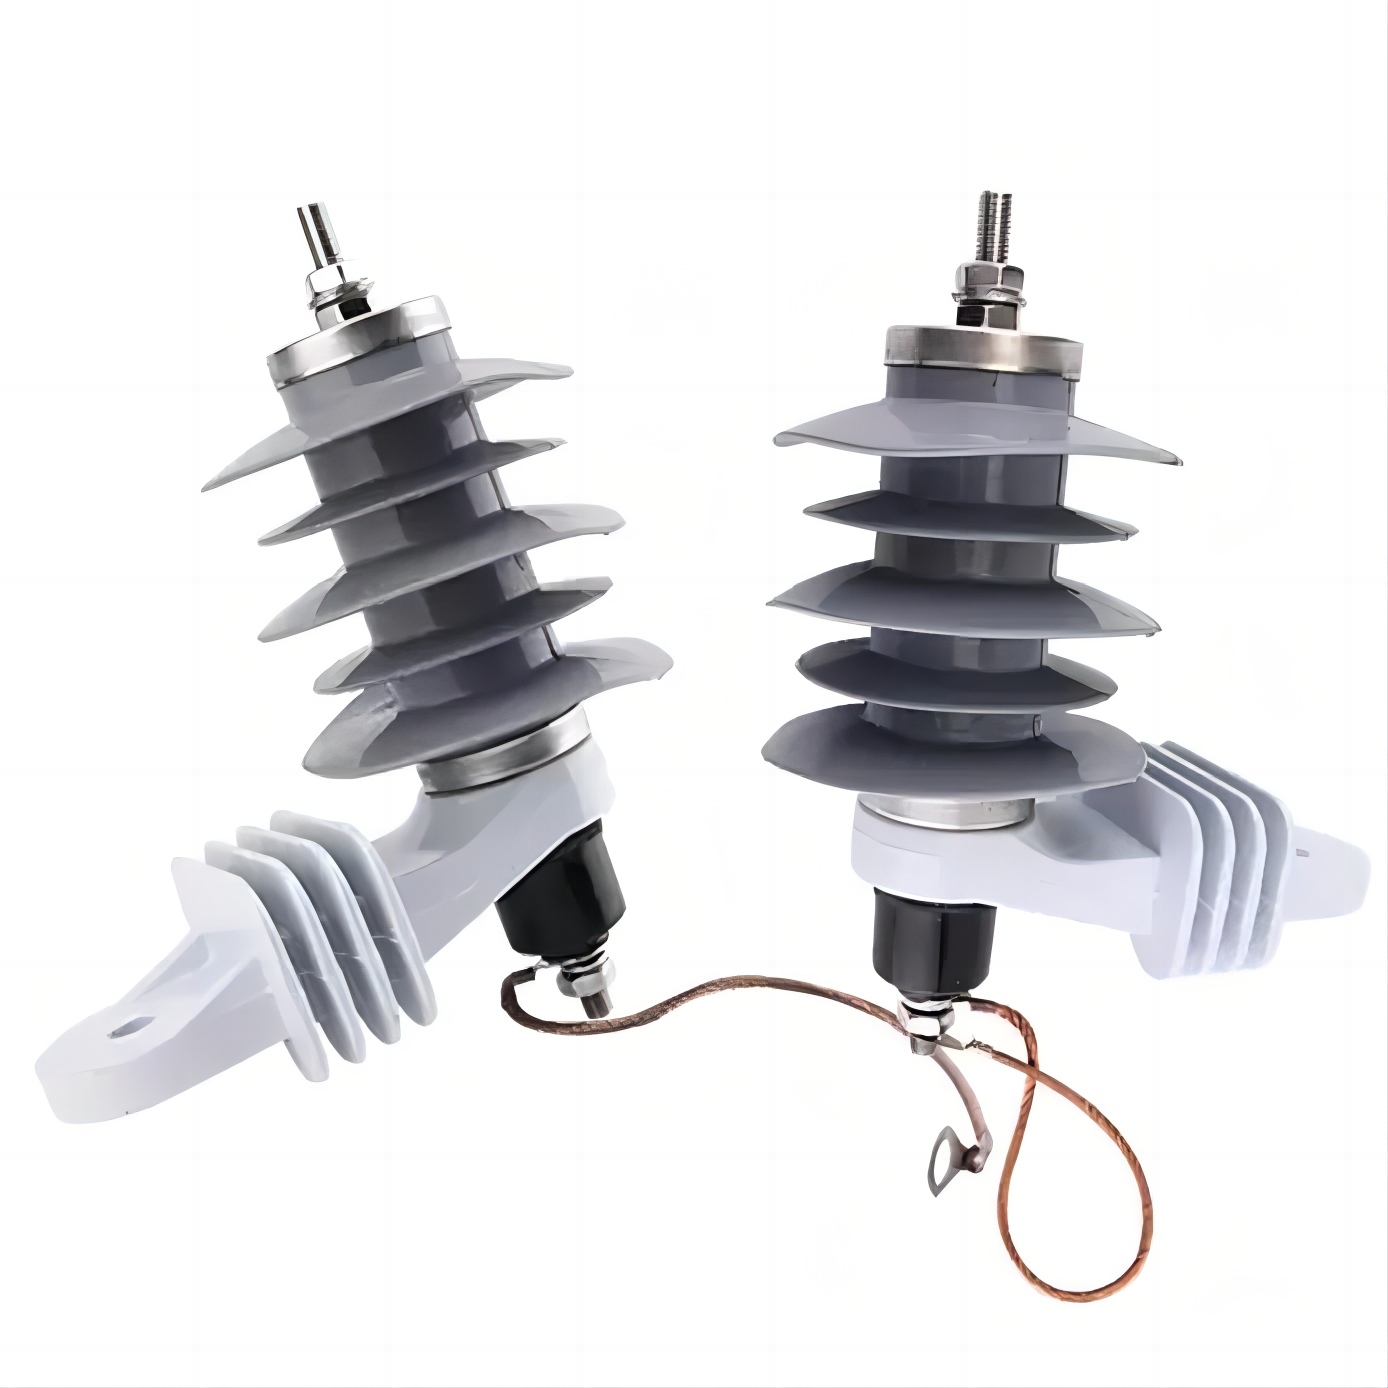 Protecting electrical equipment using zinc oxide high-voltage surge arresters